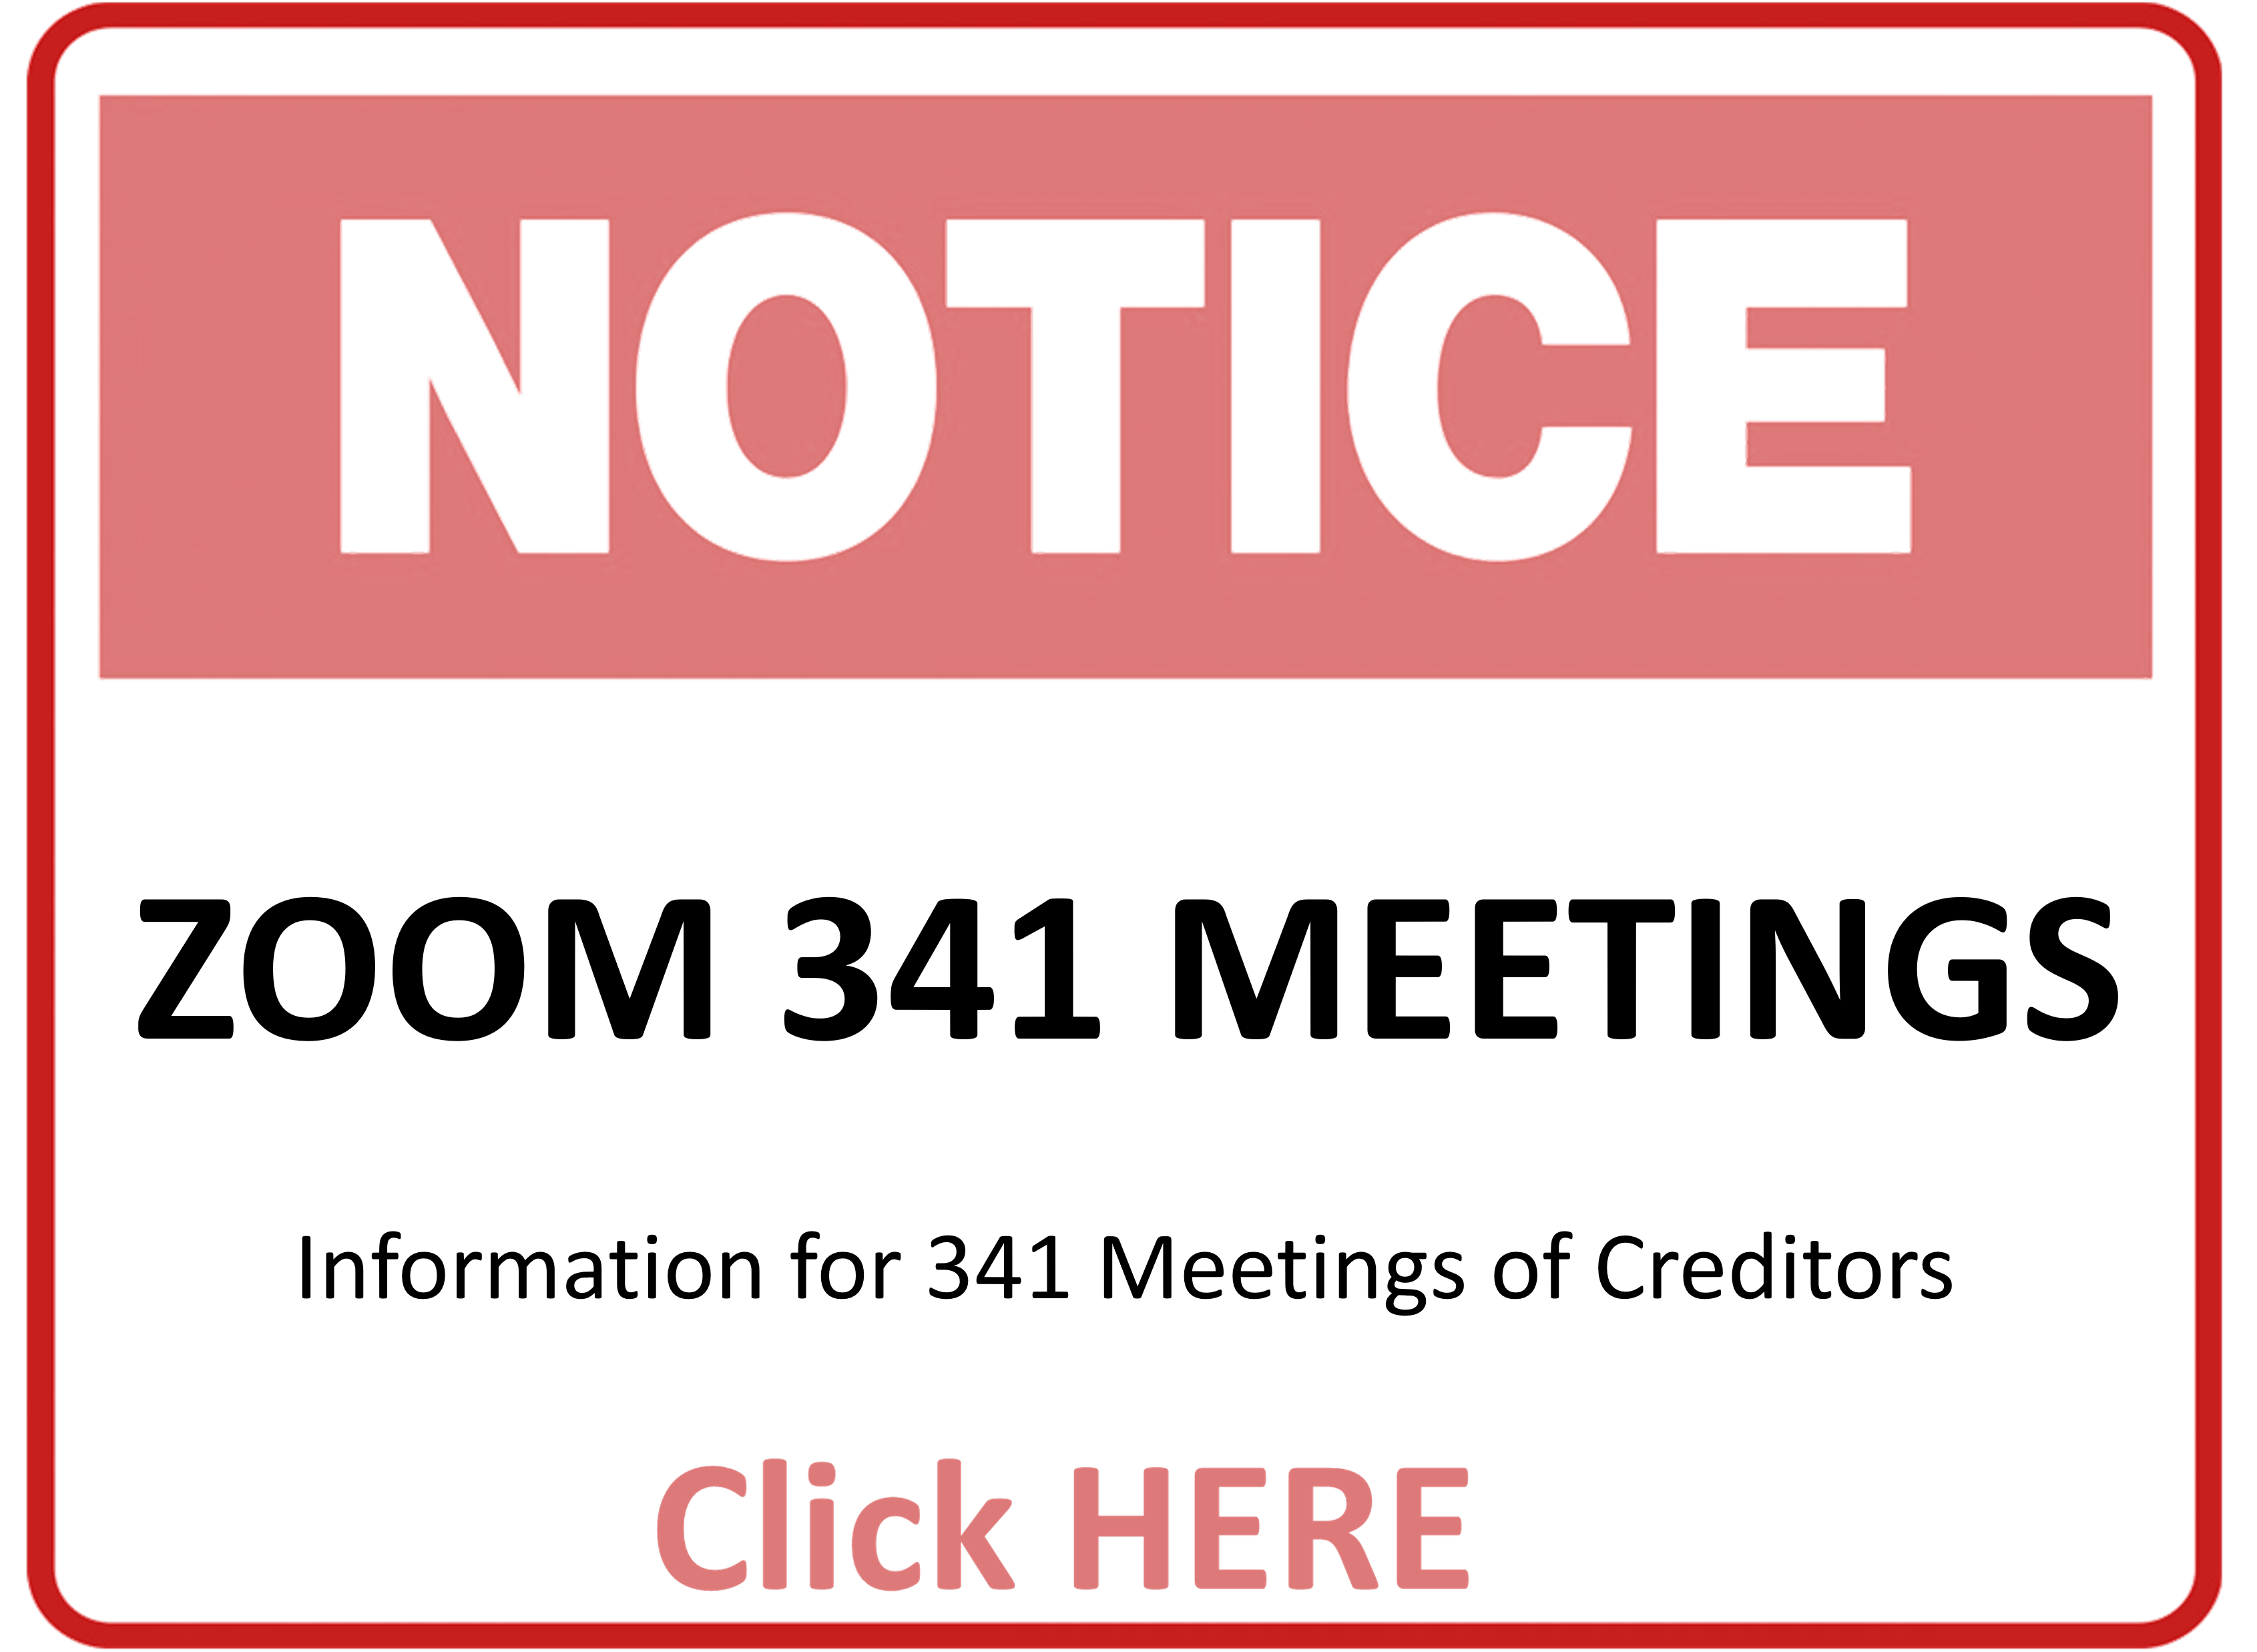 UST Best Practices Information for 341 Meetings of Creditors”